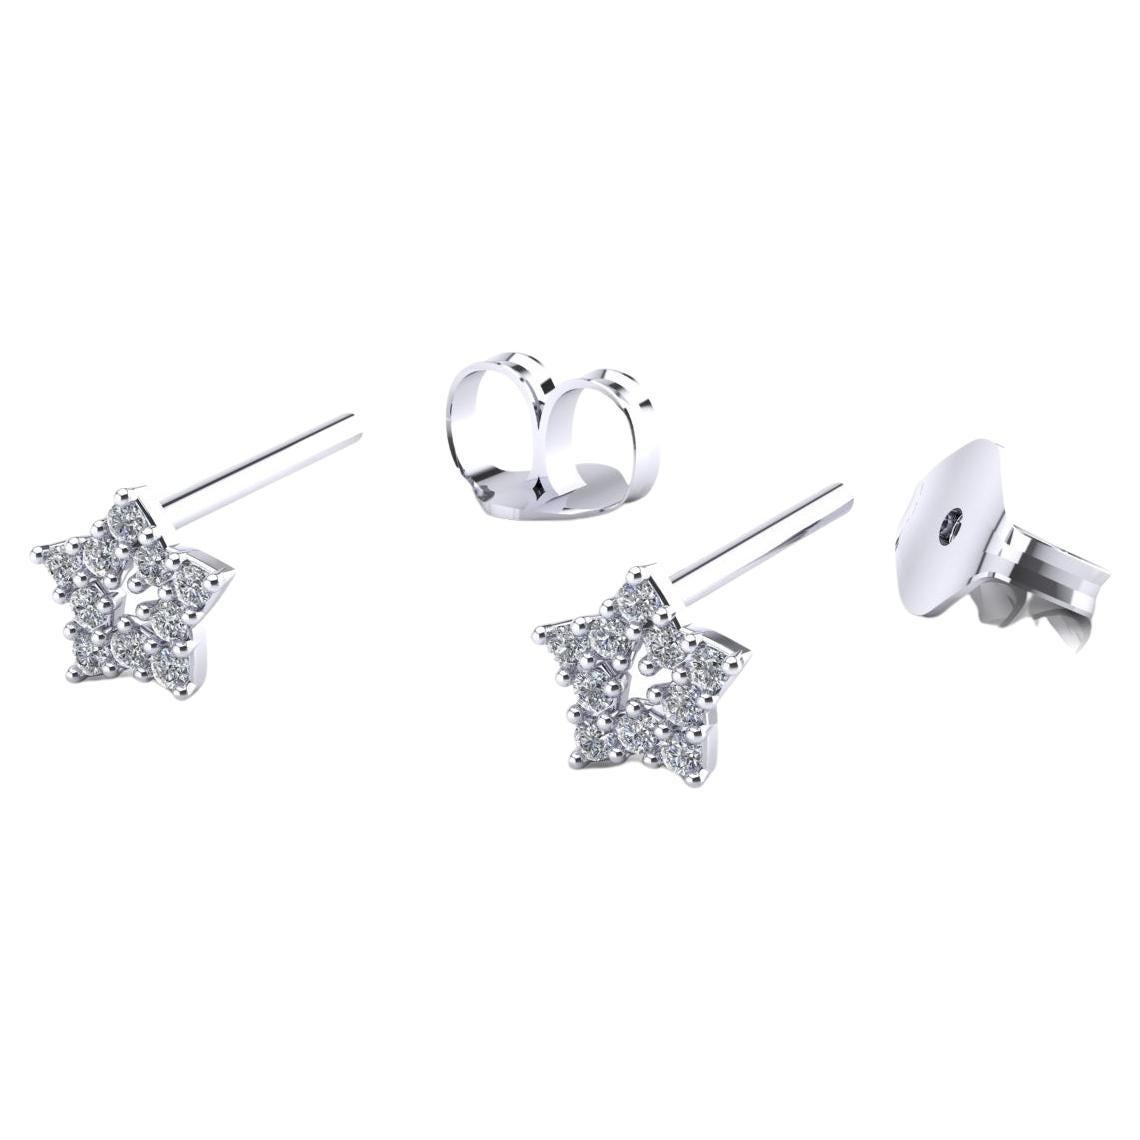 Fantasy earrings "STAR" with Natural Diamonds - White Gold 18kt - Made in Italy For Sale